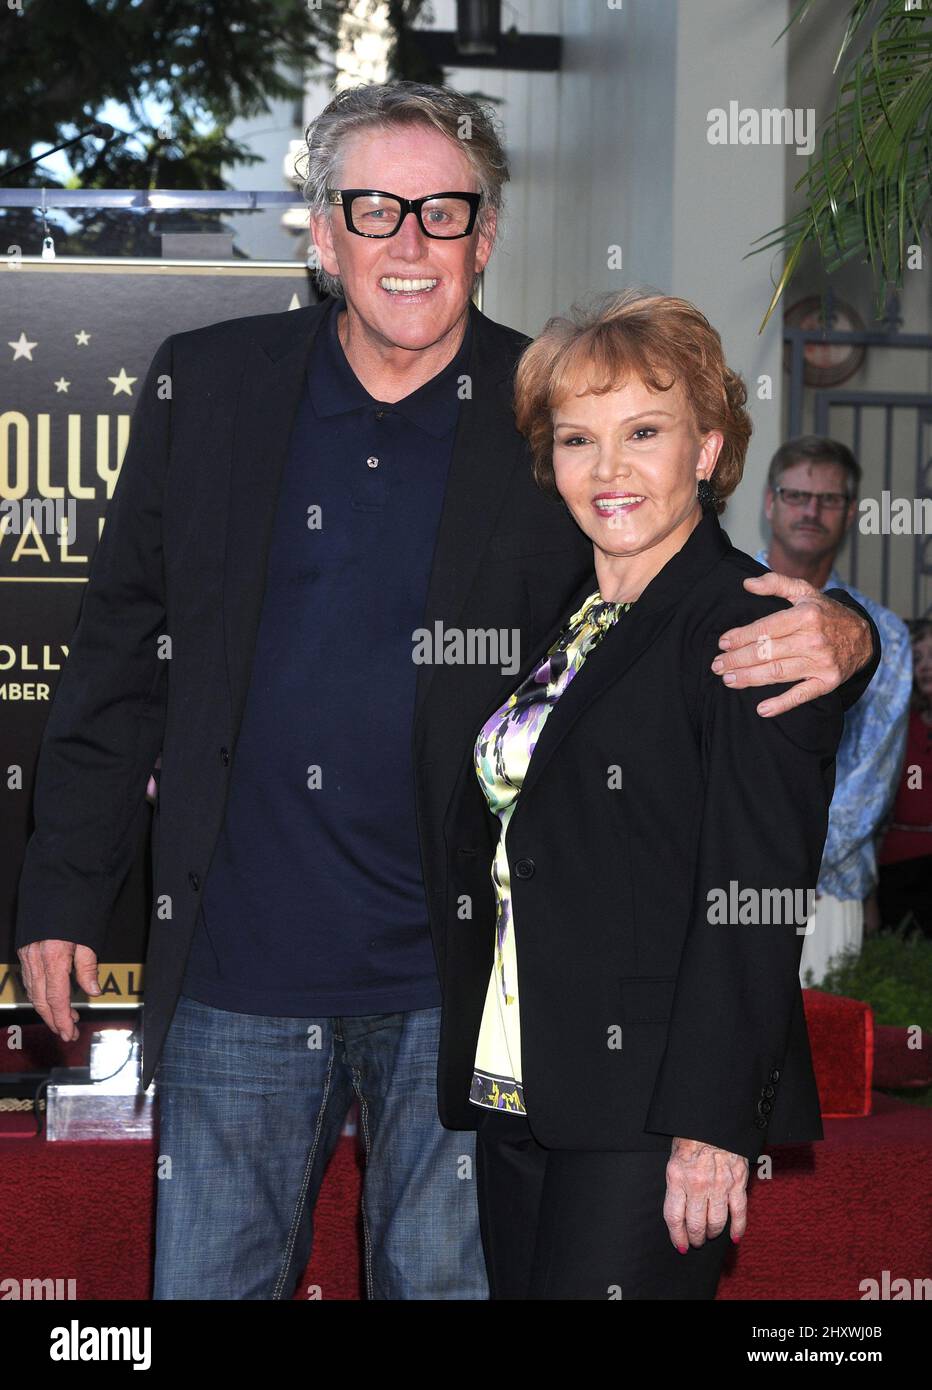 Gary Busey and Maria Elena Holly pose as Buddy Holly is honored on the Hollywood Walk of Fame in front of the Capital Records Building, Hollywood, California on September 07, 2011. Stock Photo